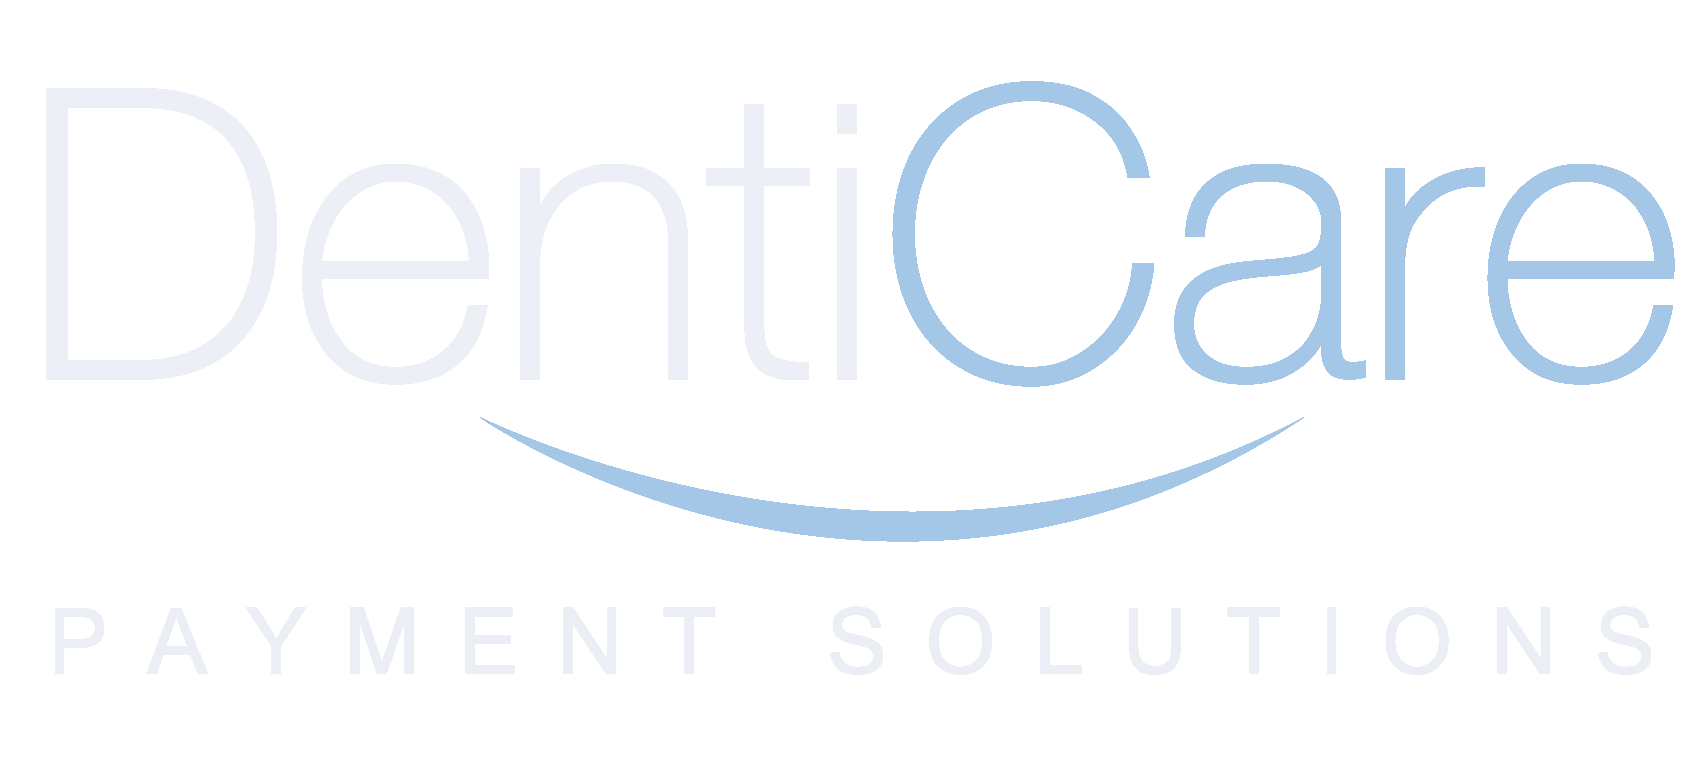 A blue and white logo for denticare payment solutions